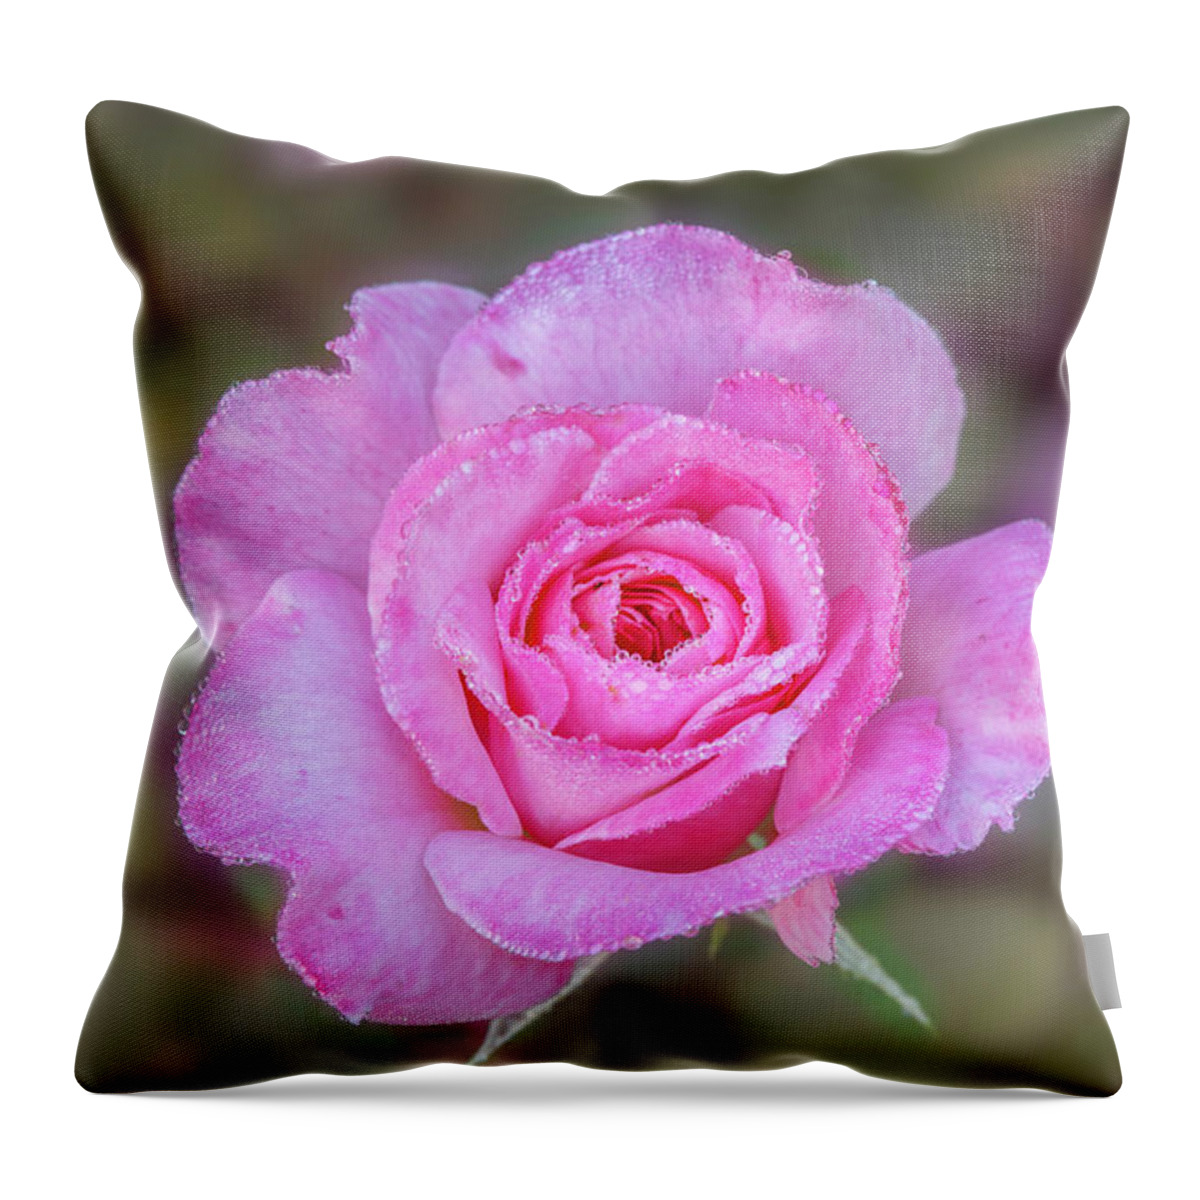 Rose Throw Pillow featuring the photograph A pink rose kissed by morning dew. by Usha Peddamatham